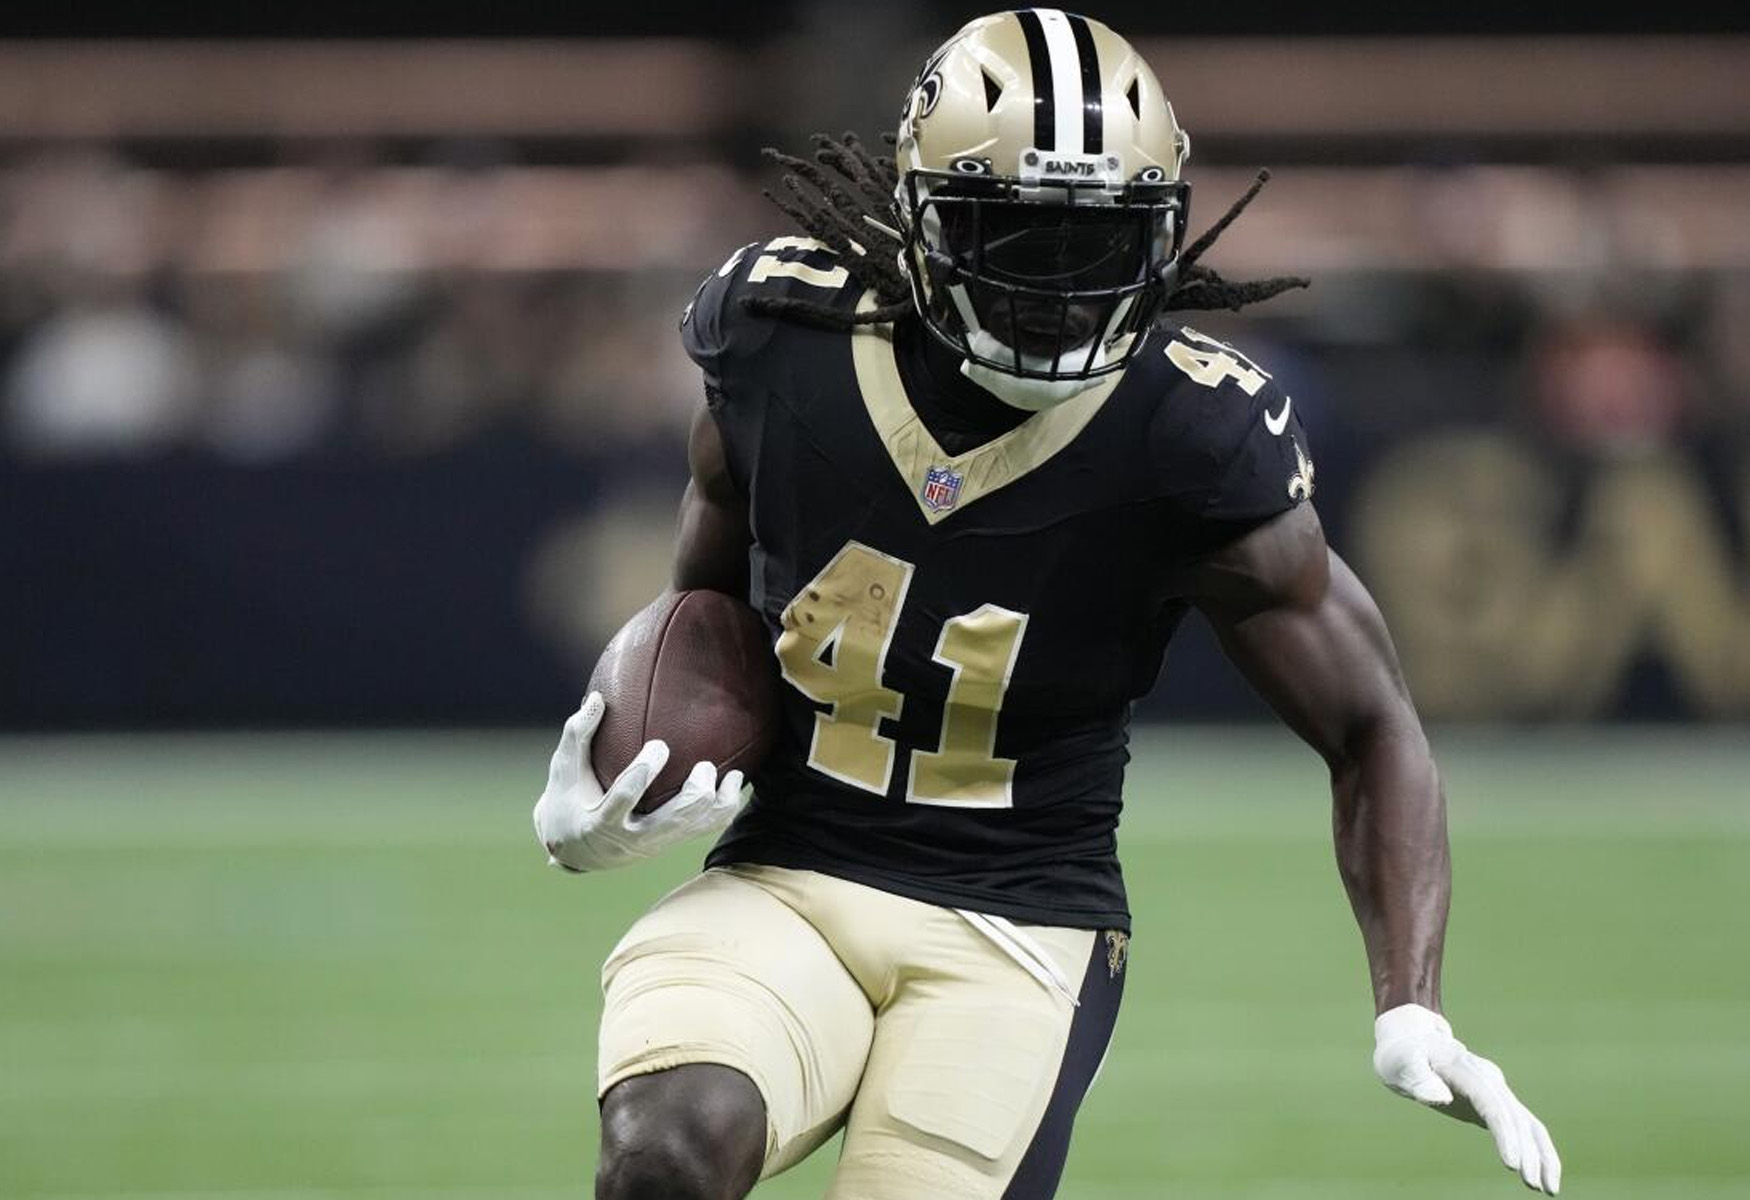 alvin-kamara-collides-with-nfl-official-causing-gruesome-leg-injury